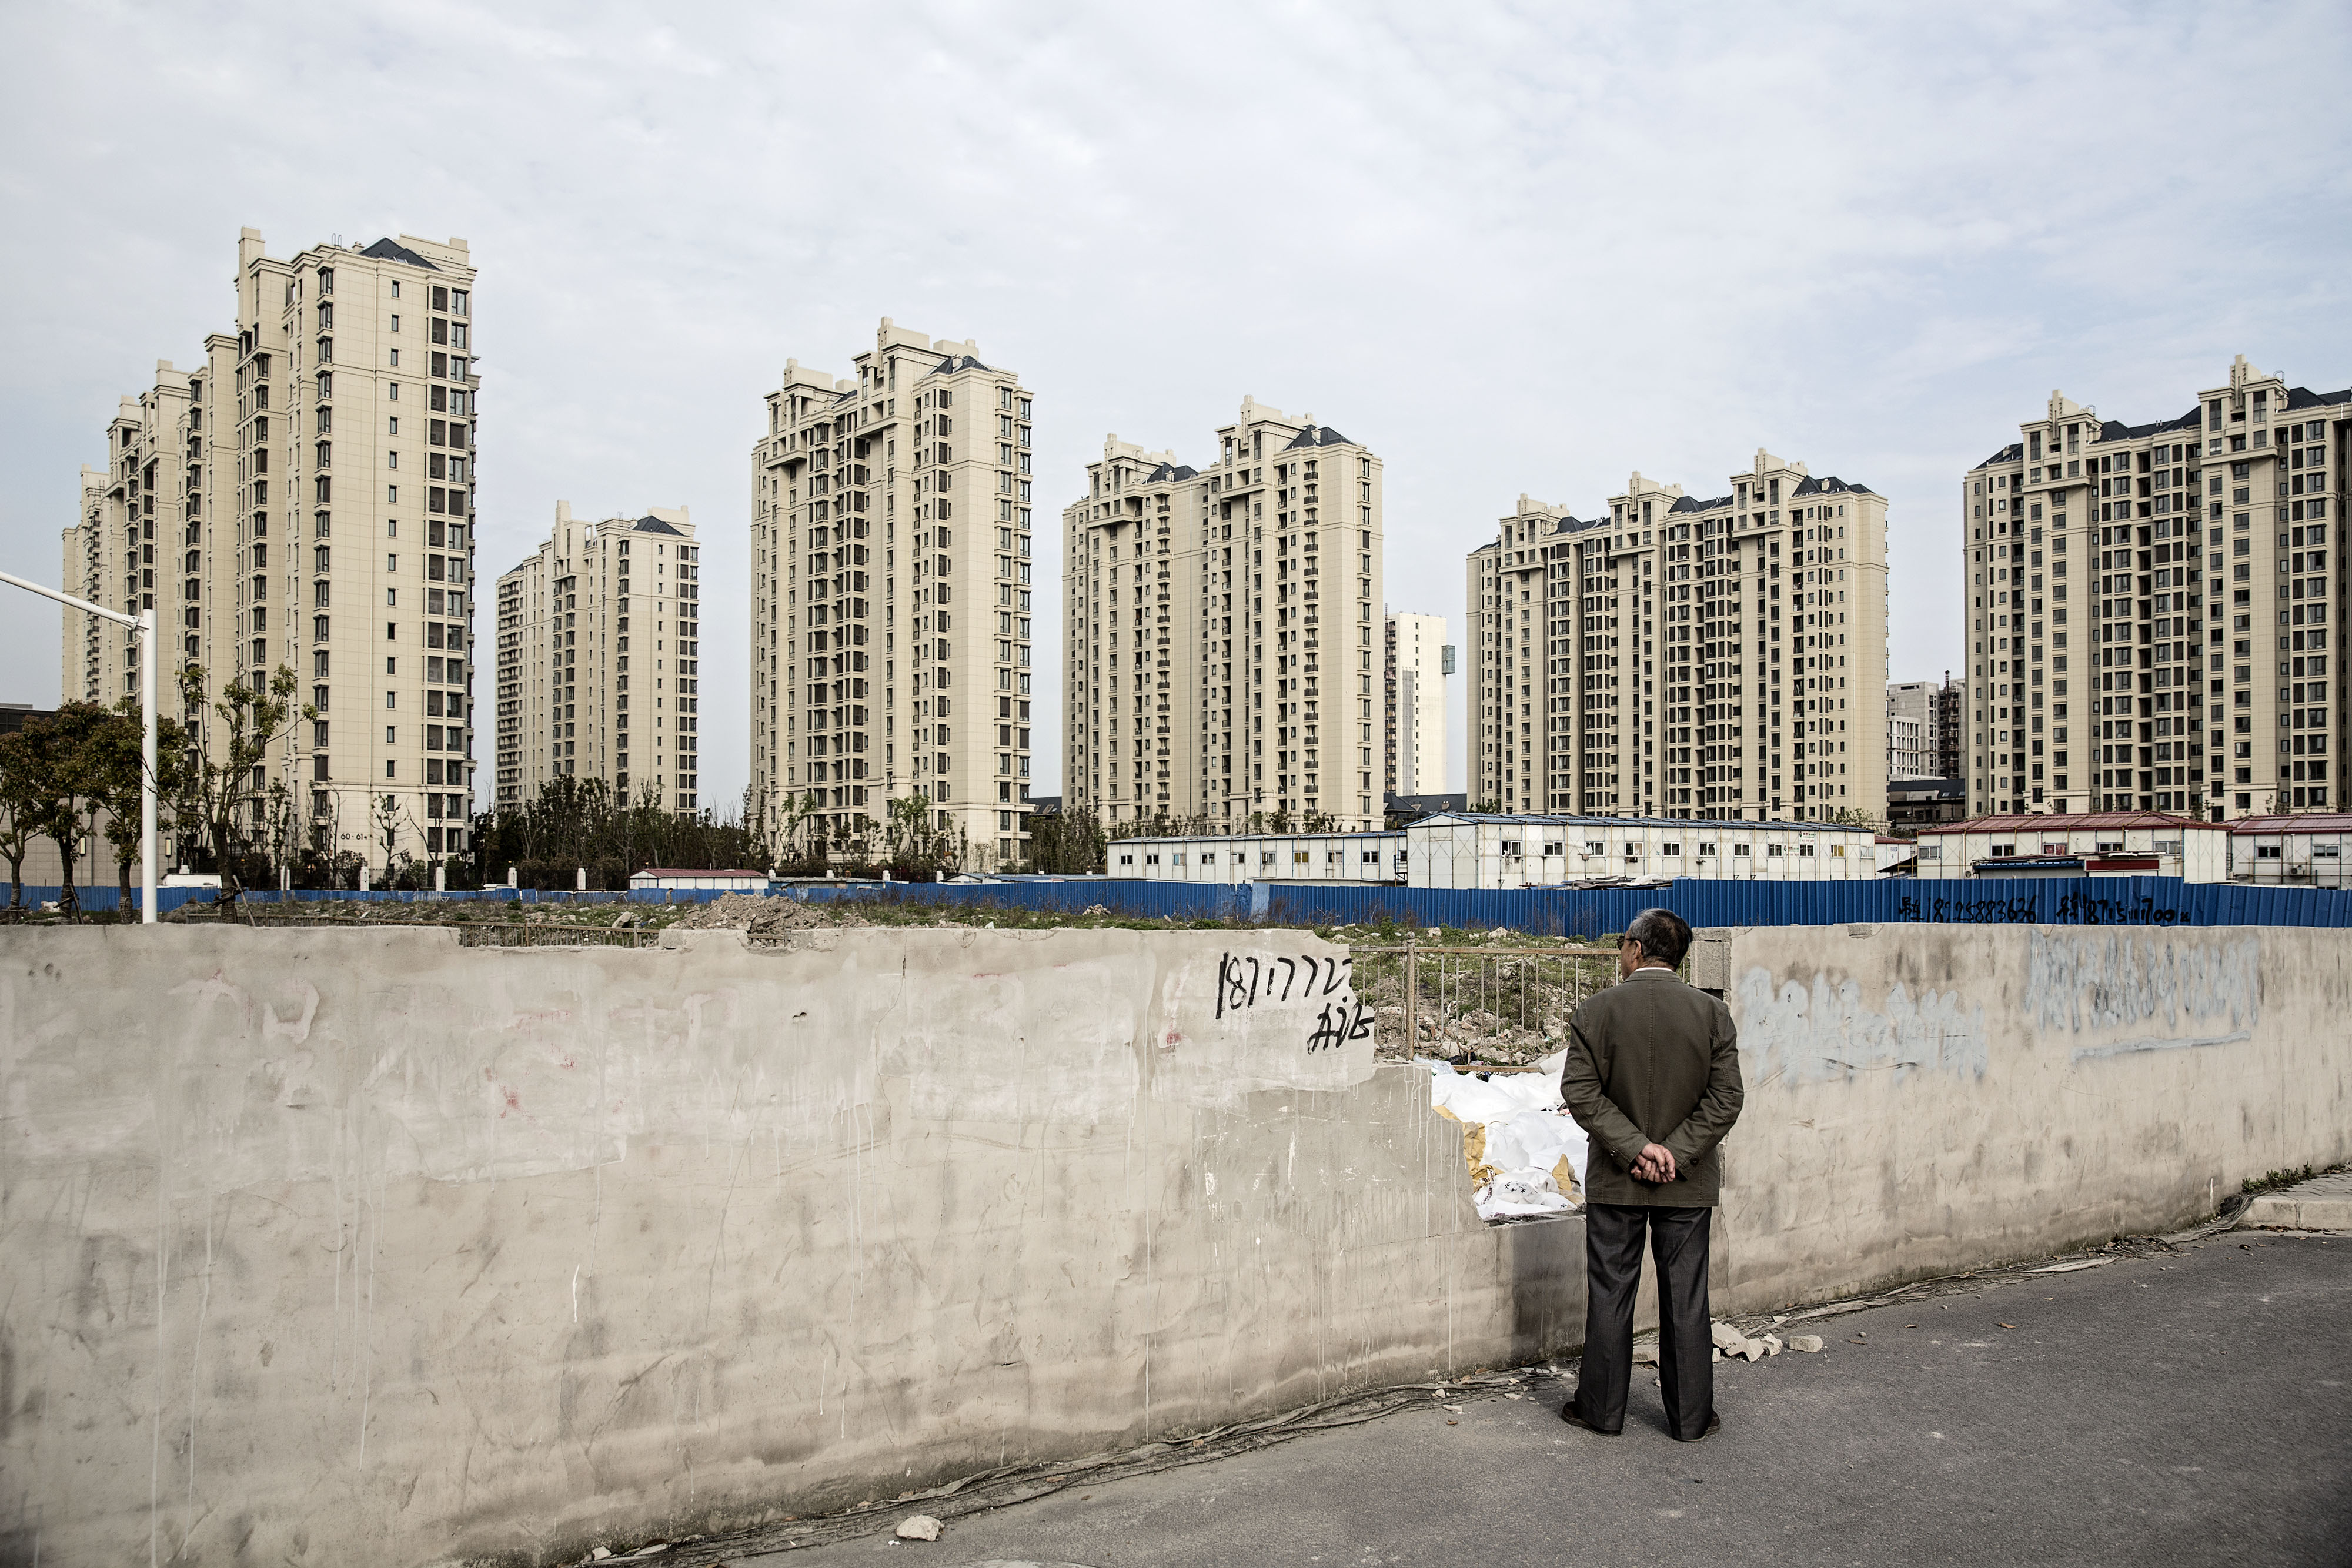 Residential buildings in the Jiading district of Shanghai, China (credit: Getty images)